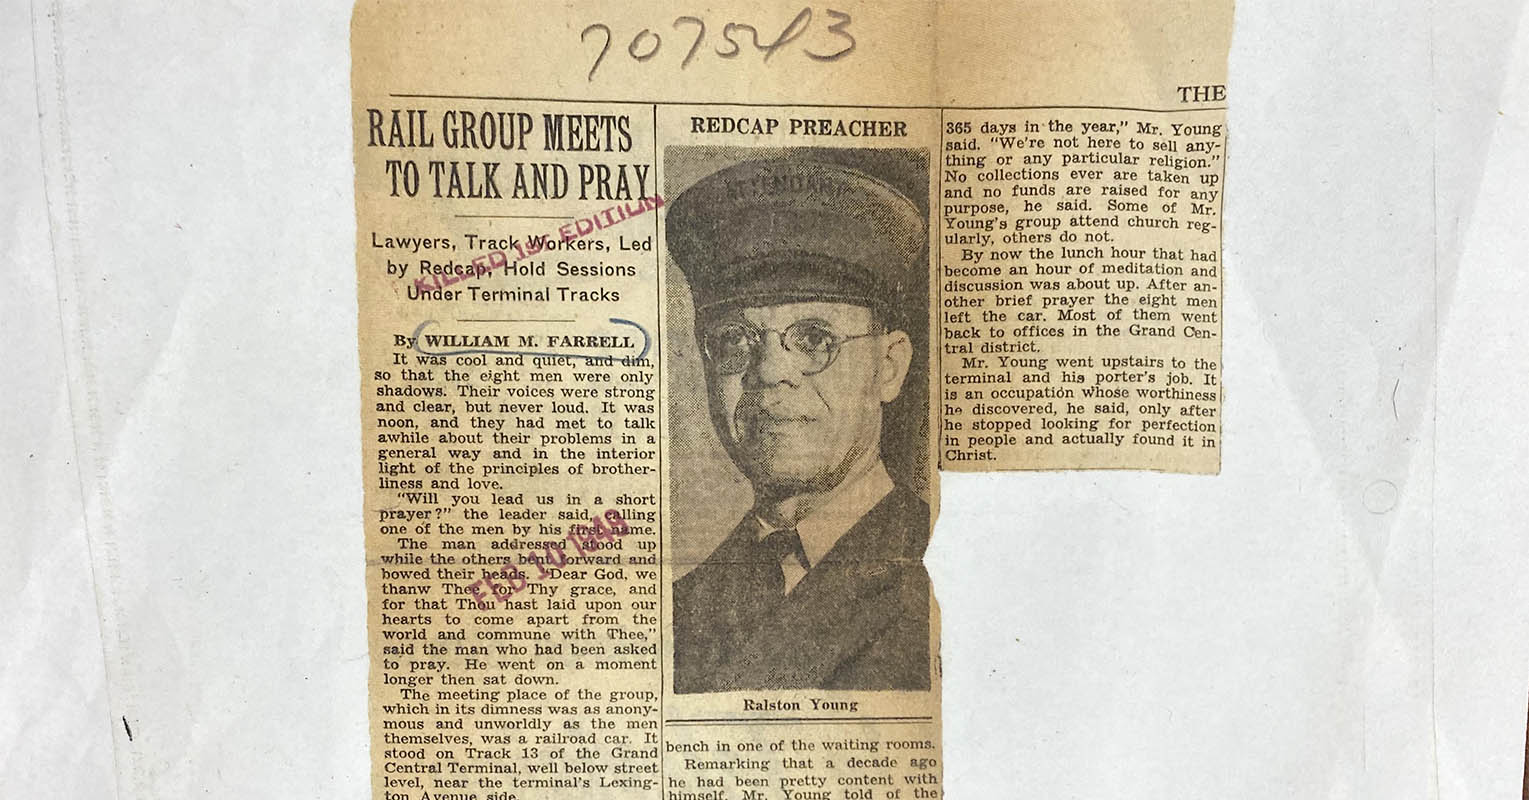 Article about Ralston C. Young the Redcap Preacher in New York Times